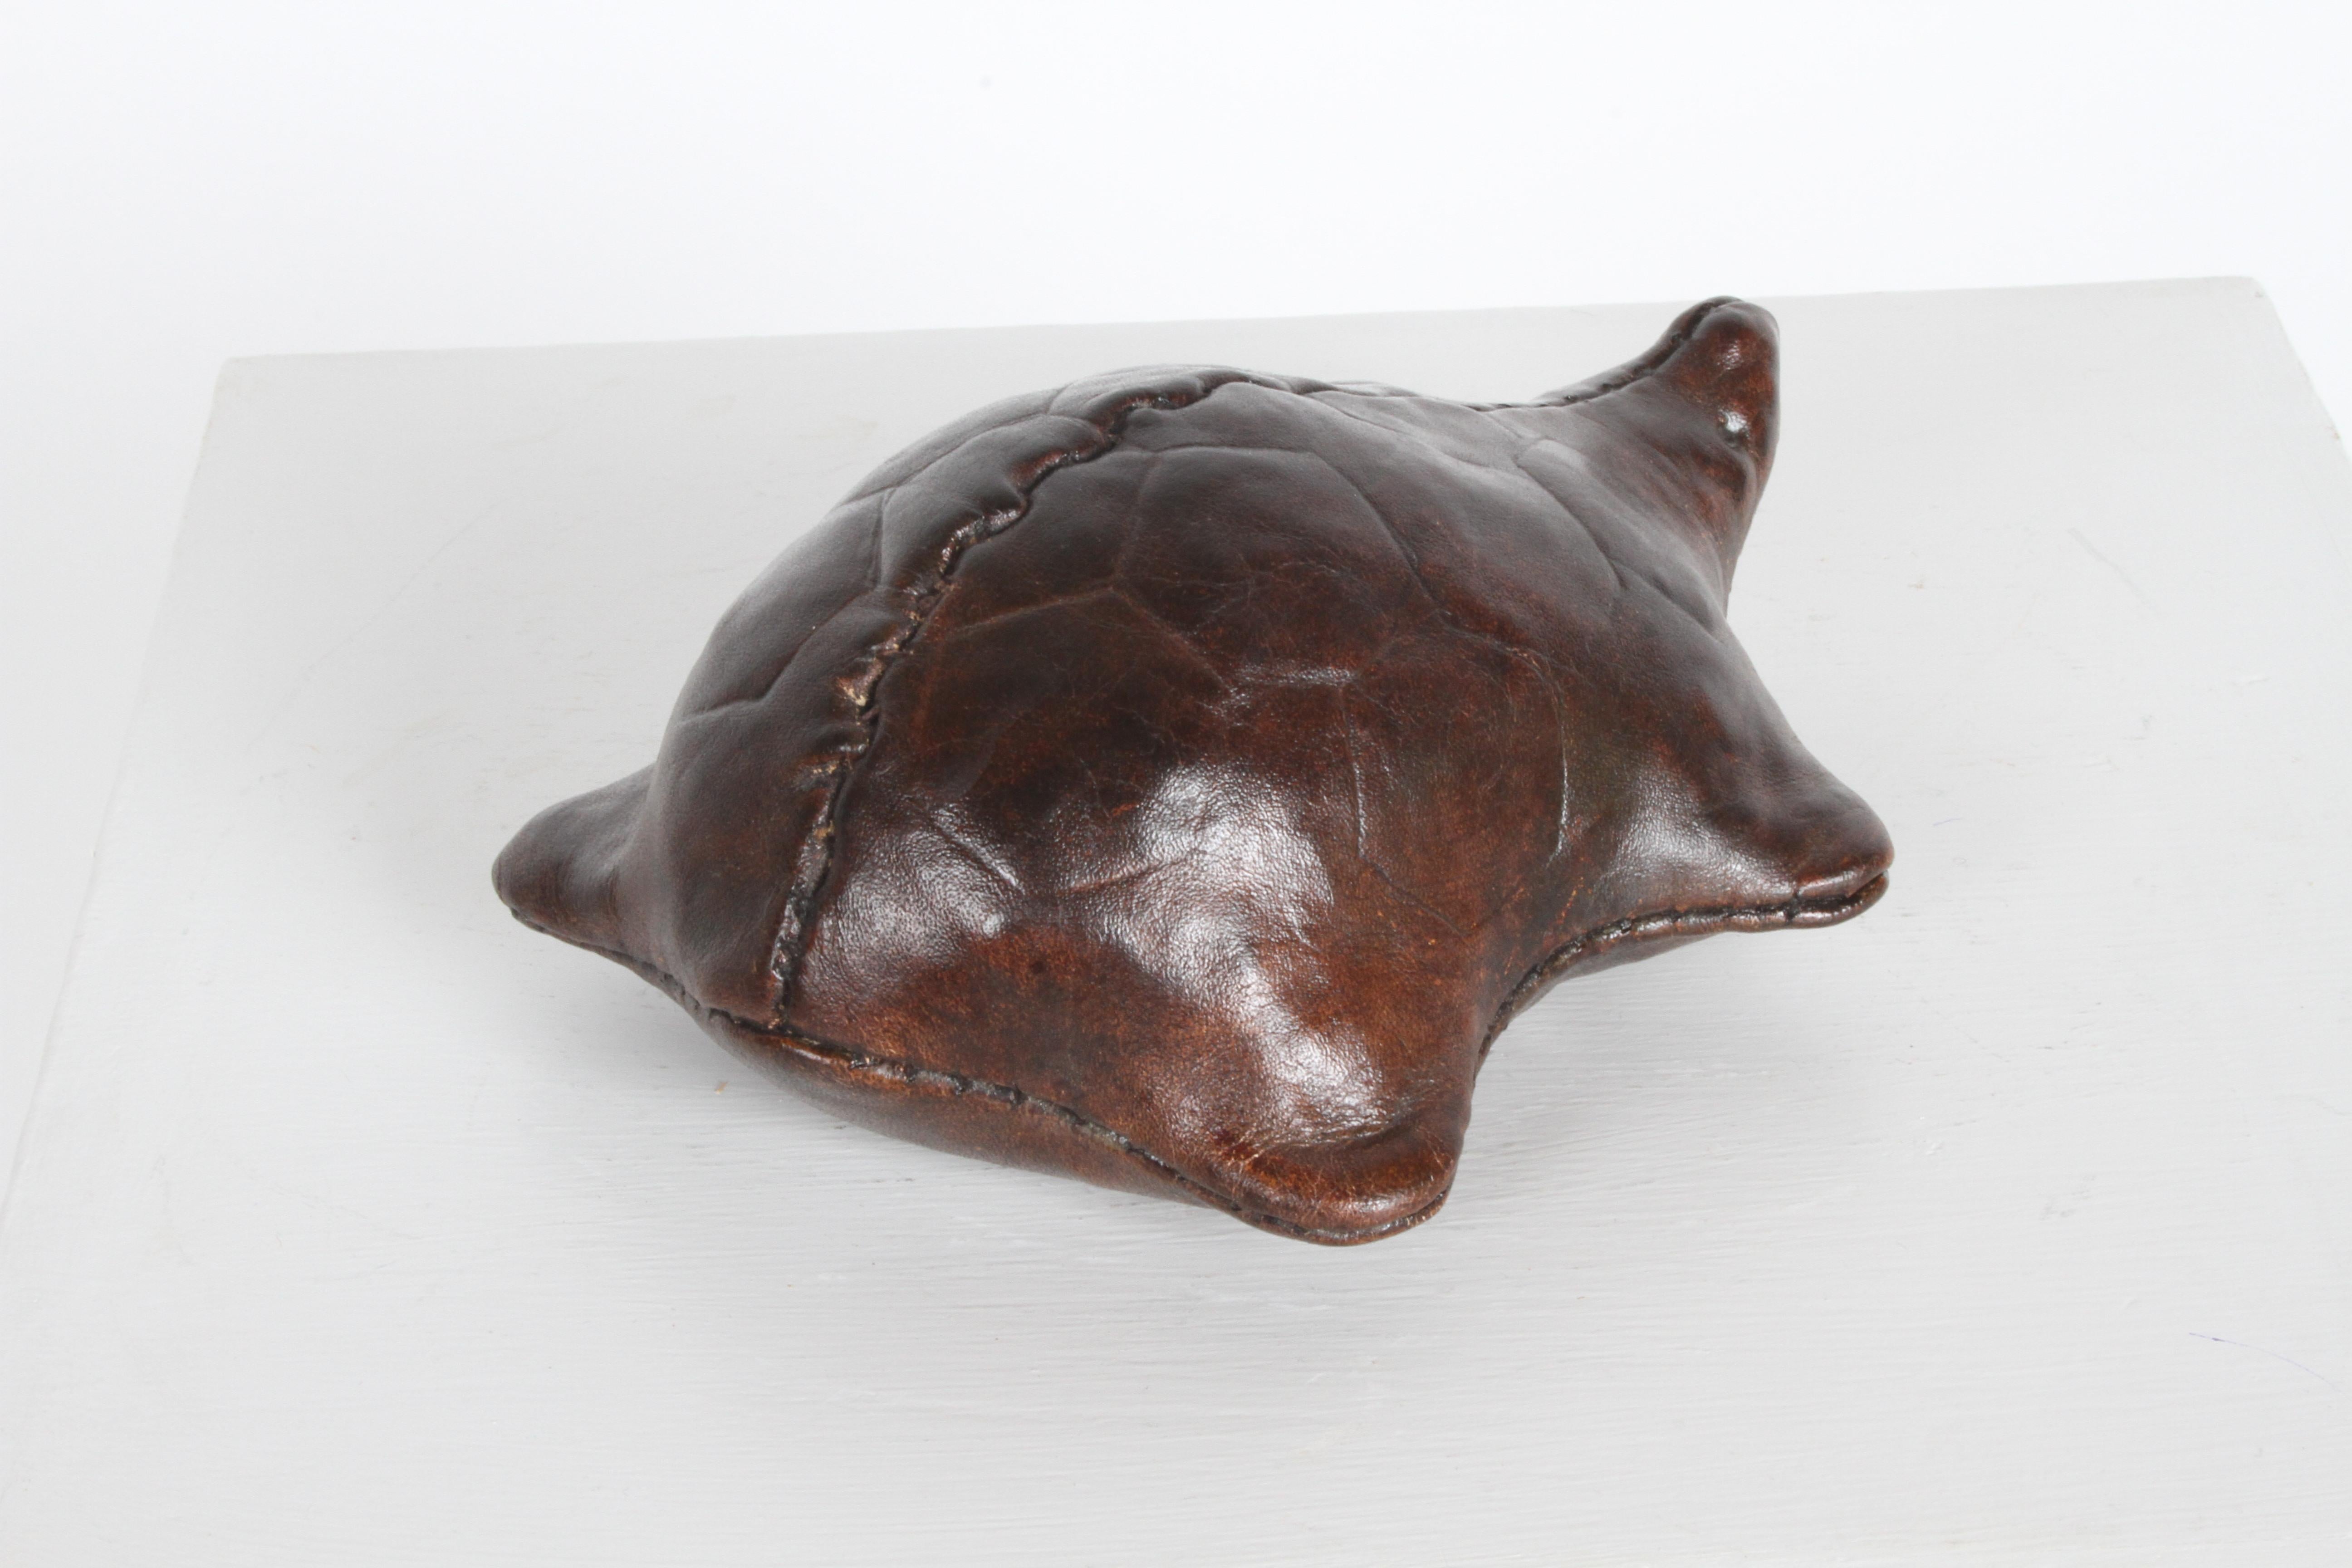 English Vintage Omersa Leather Turtle Use as Paperweight or Decorative, Retains Label For Sale